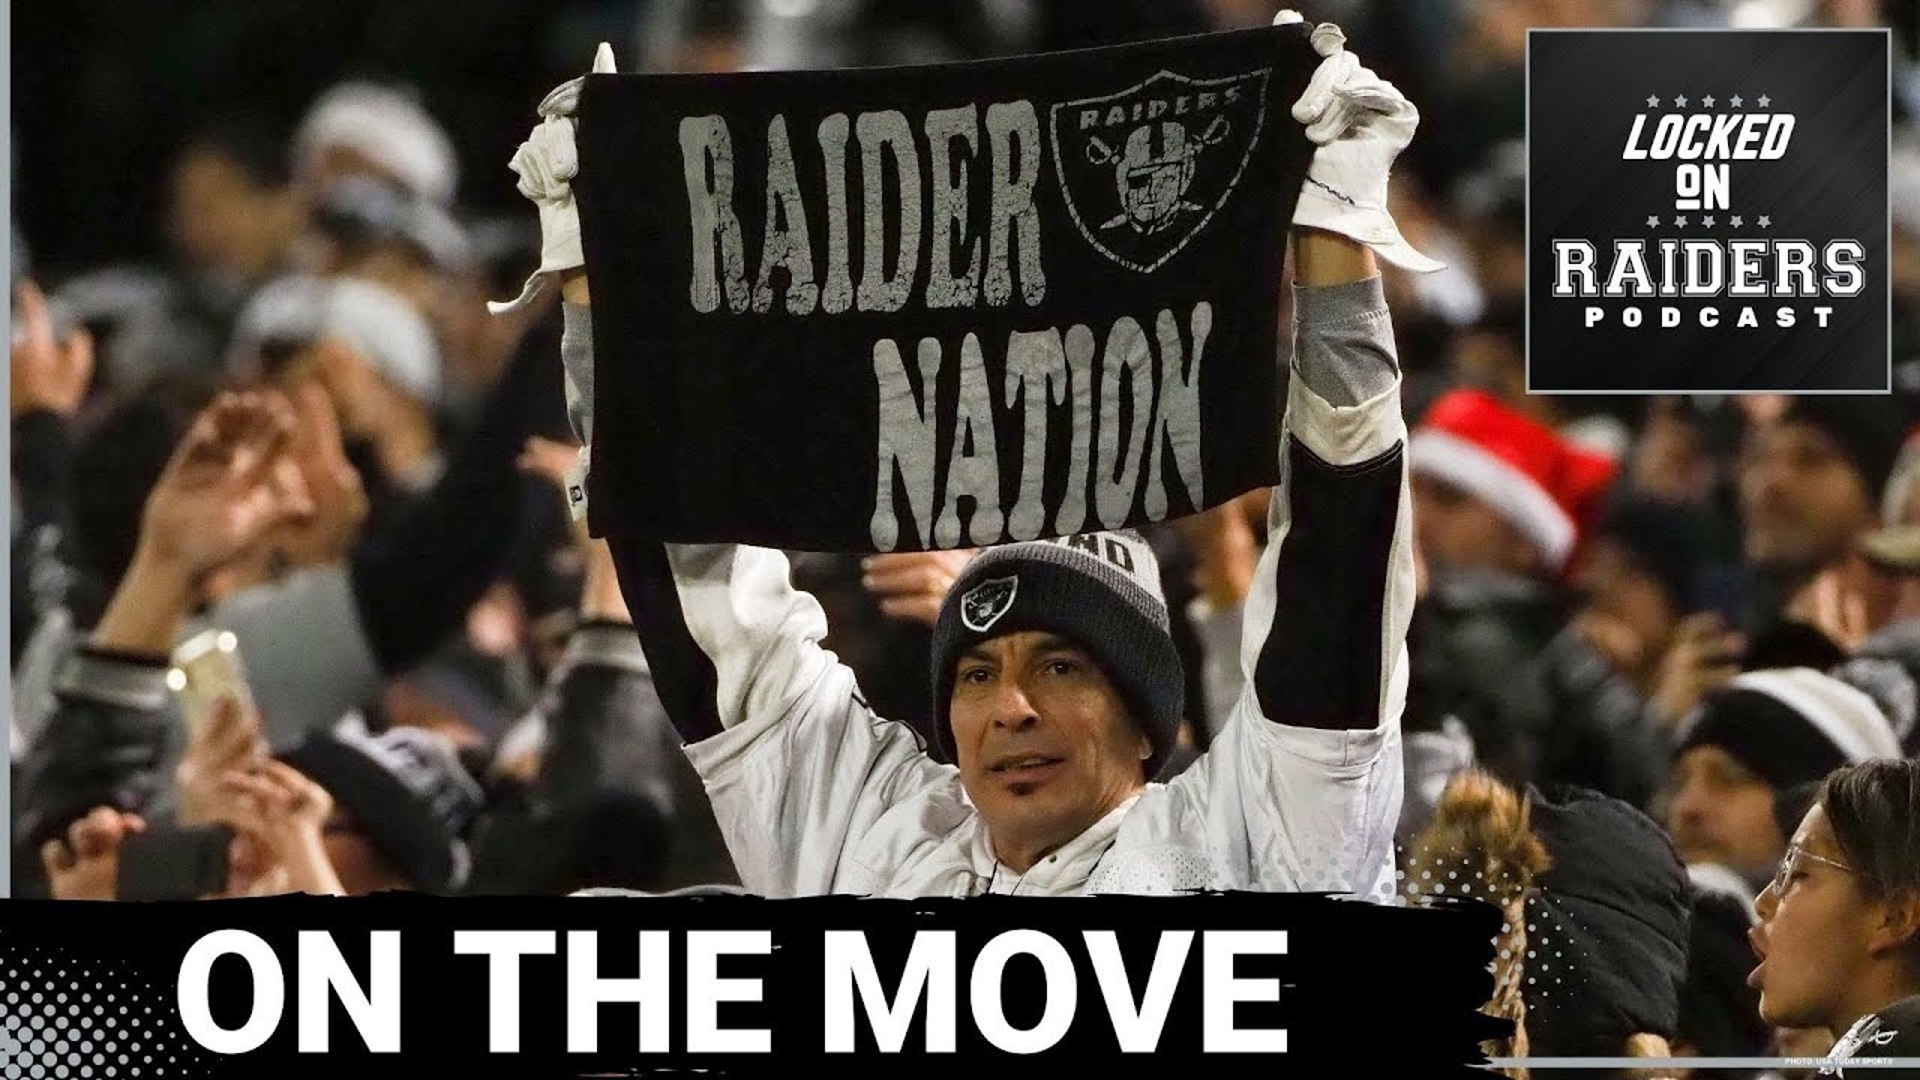 We will talk about the possibility of the Raiders shifting their training camp from the Intermountain Health Performance center to Costa Mesa California.